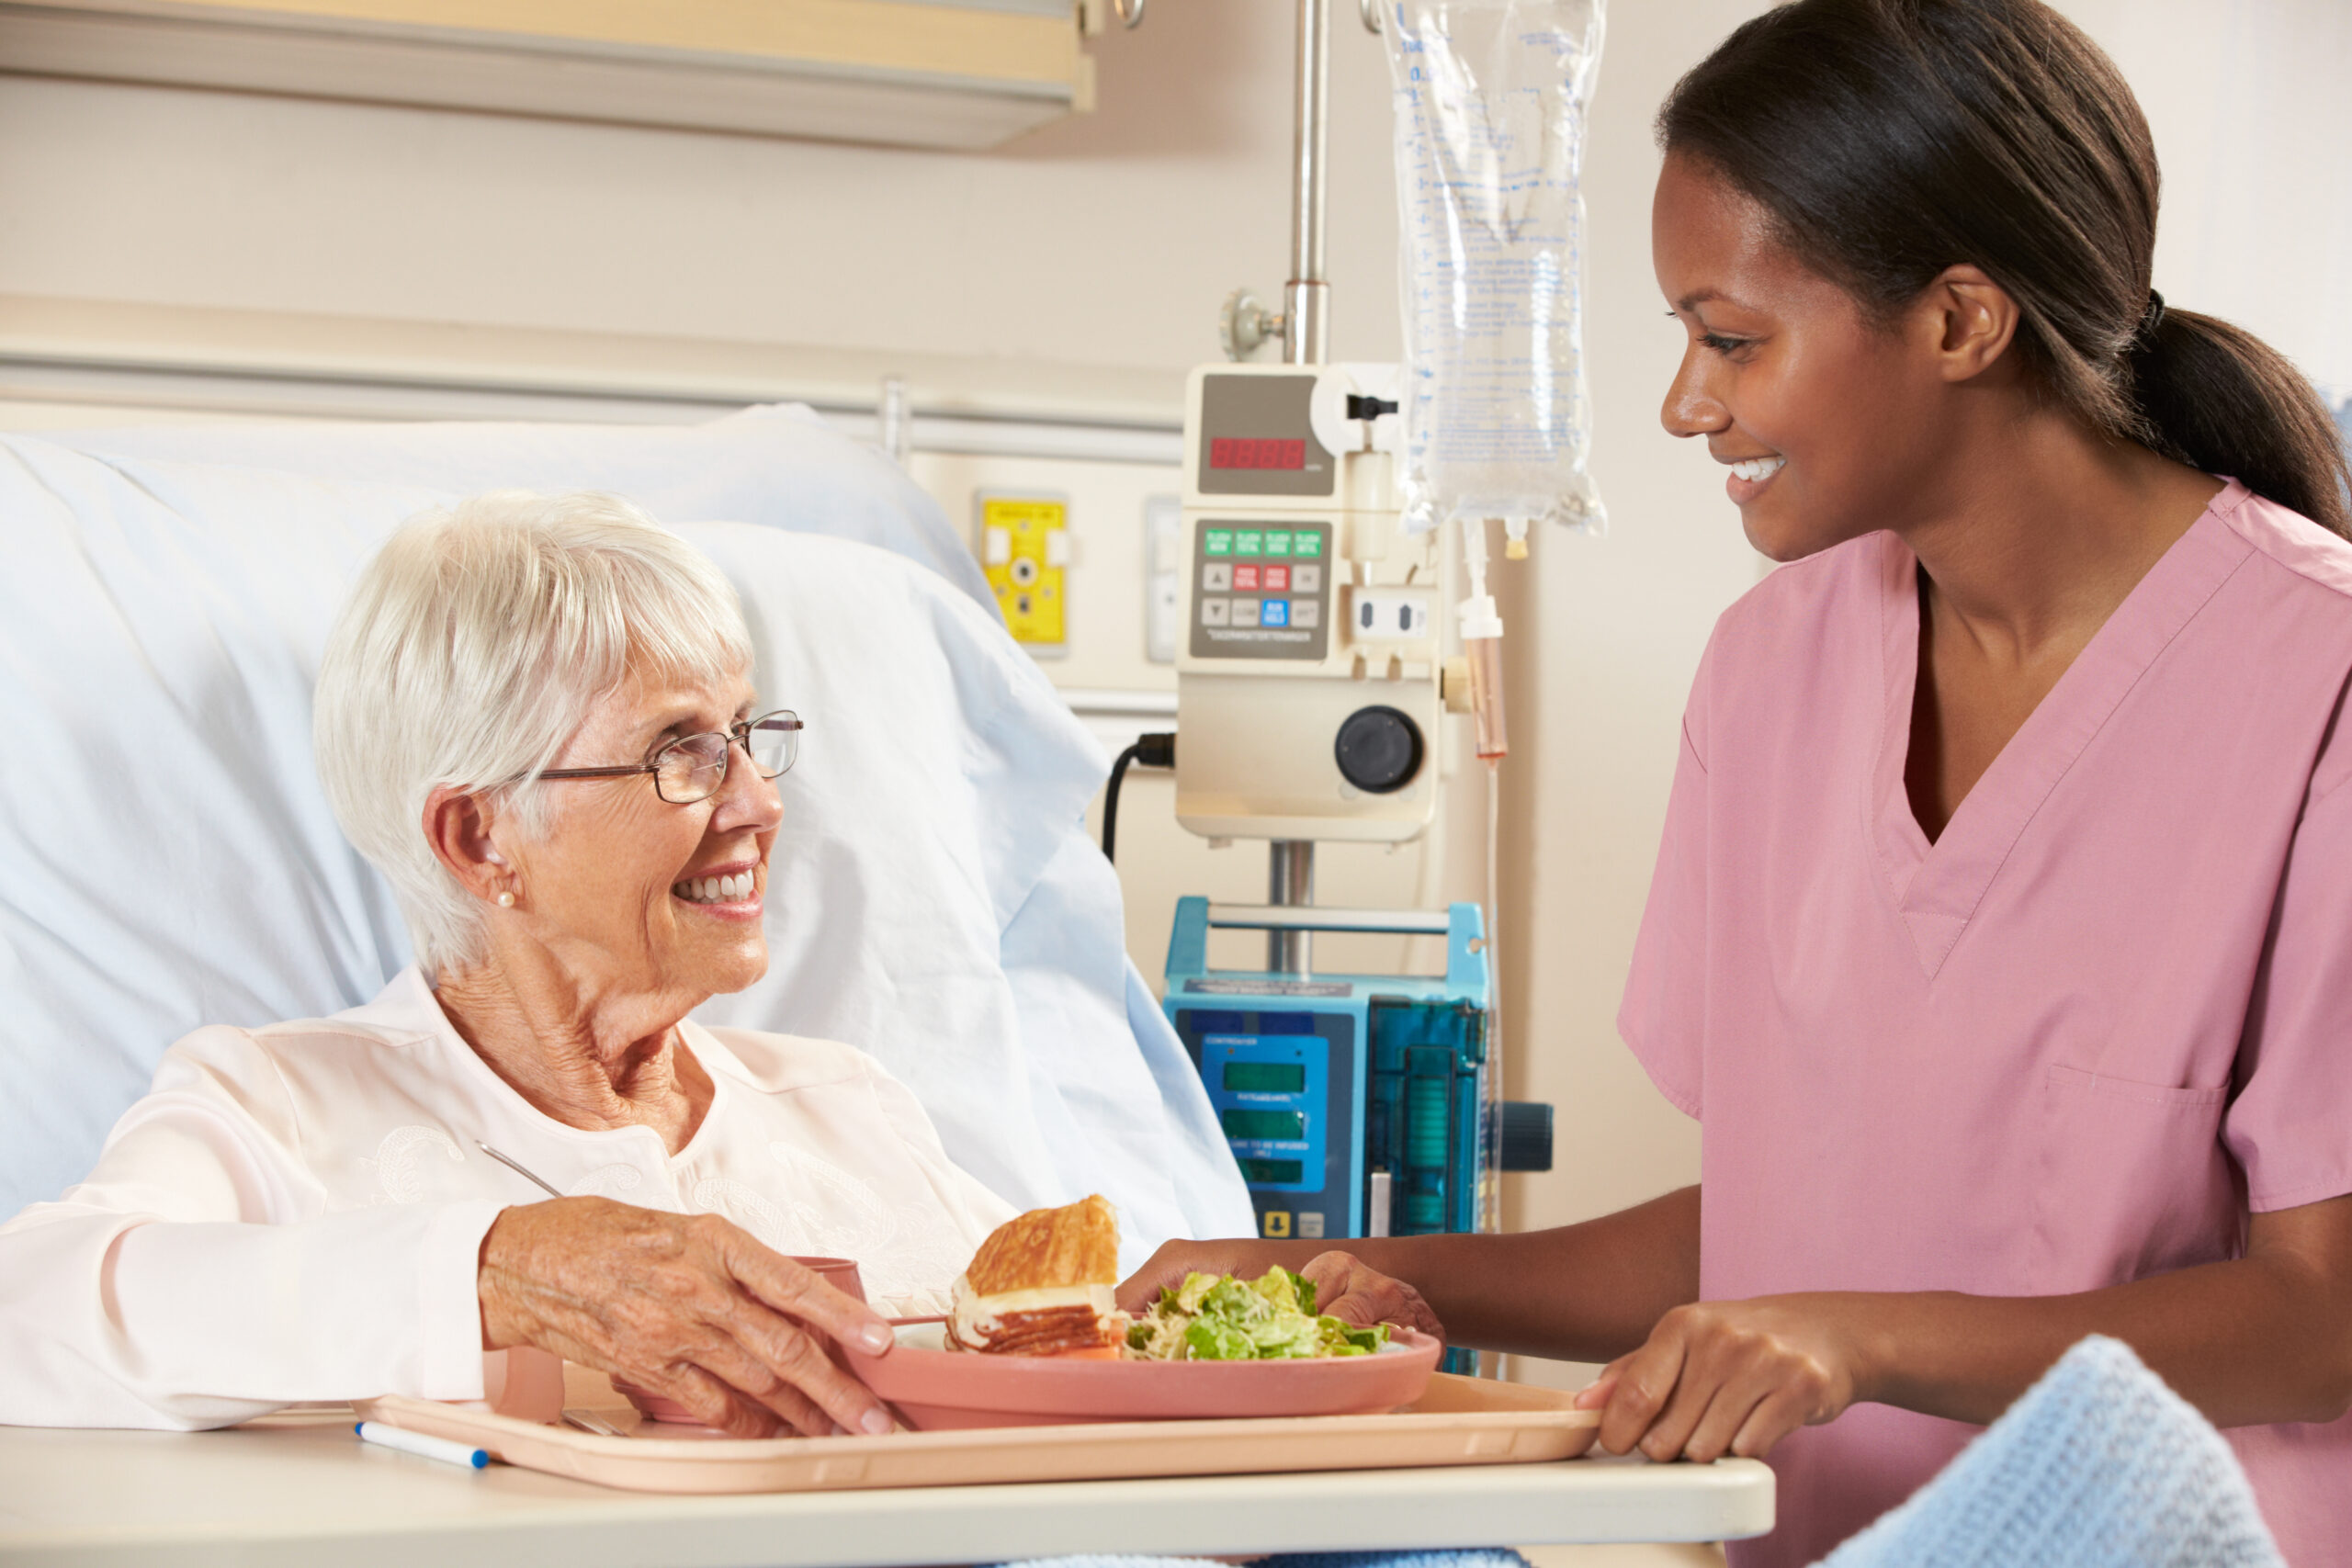 Nurse feeding geriatric patients. Geriatric Nutrition: The Importance of Nutrient Density for Older Adults